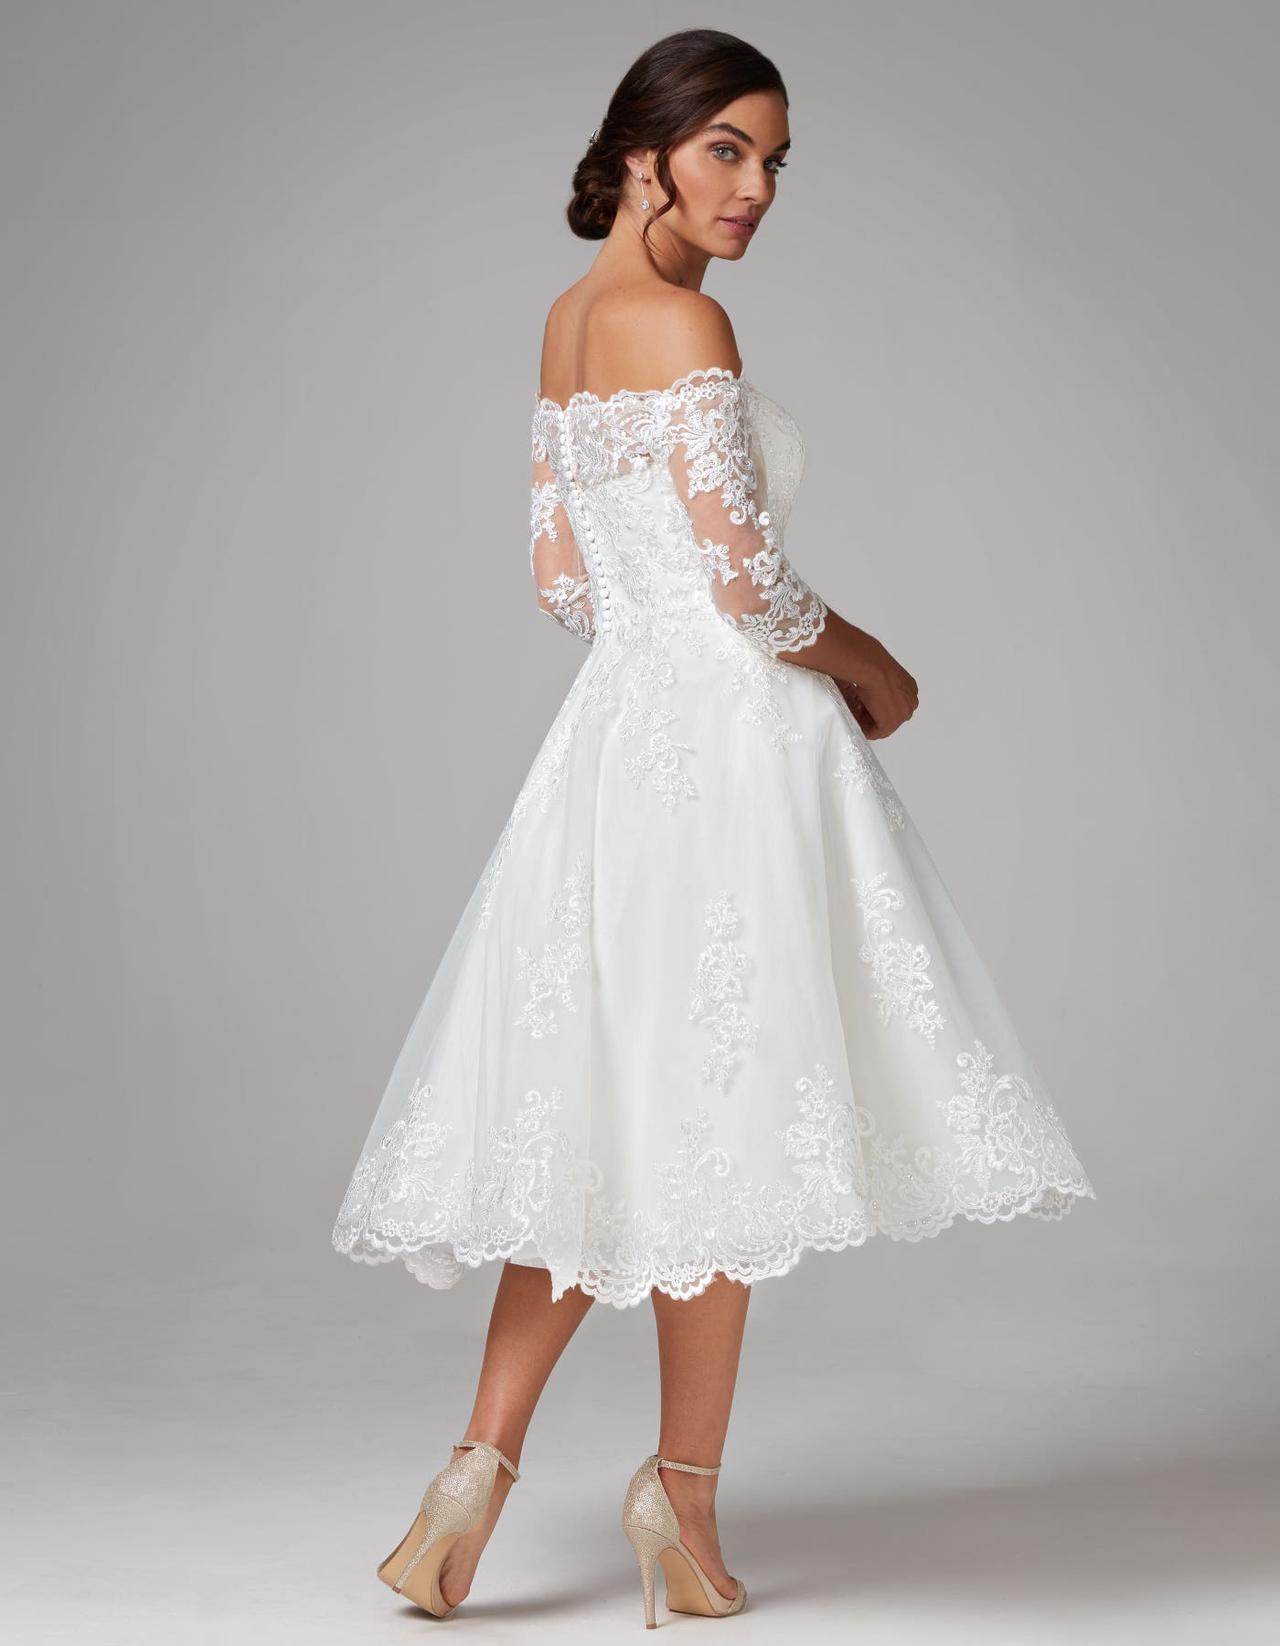 What are the options for alterations to a very low back dress that would  hide wearing a bra? : r/weddingdress